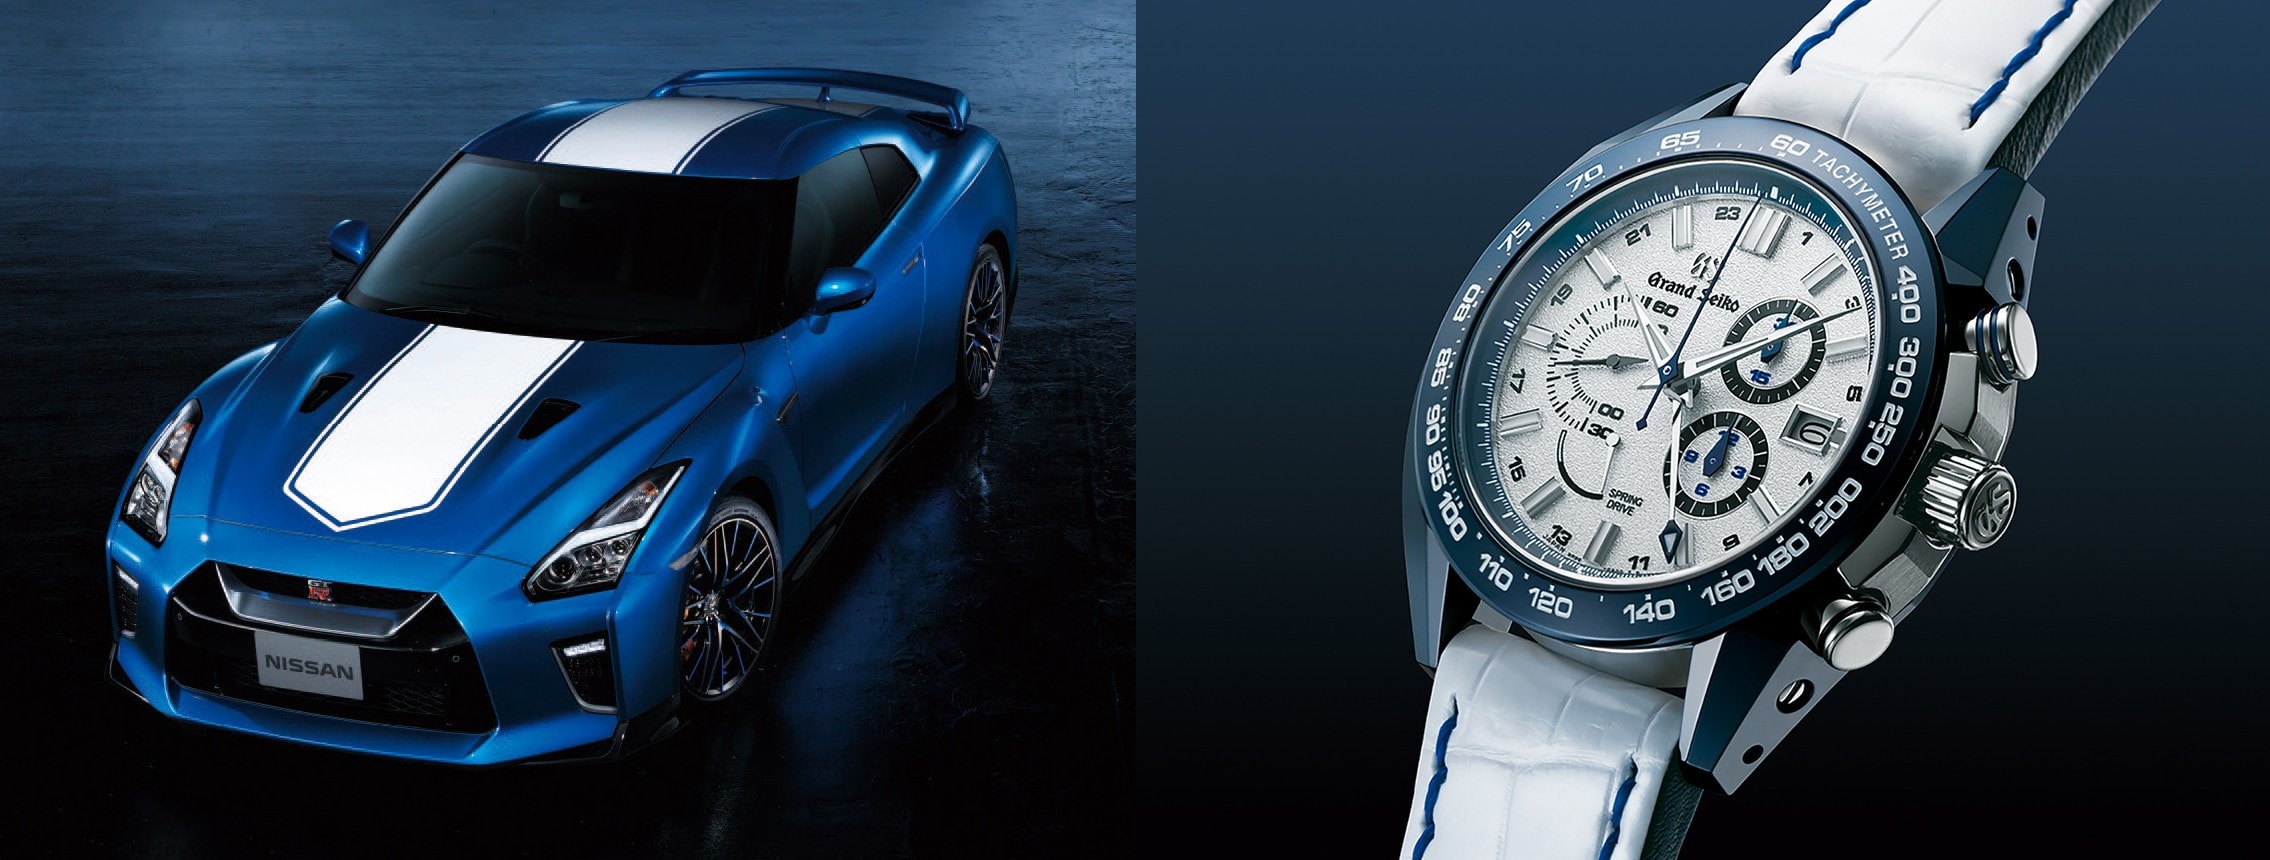 You Can Still Buy a Grand Seiko Nissan GT-R 50th Anniversary Edition Watch  For $21,000 - autoevolution